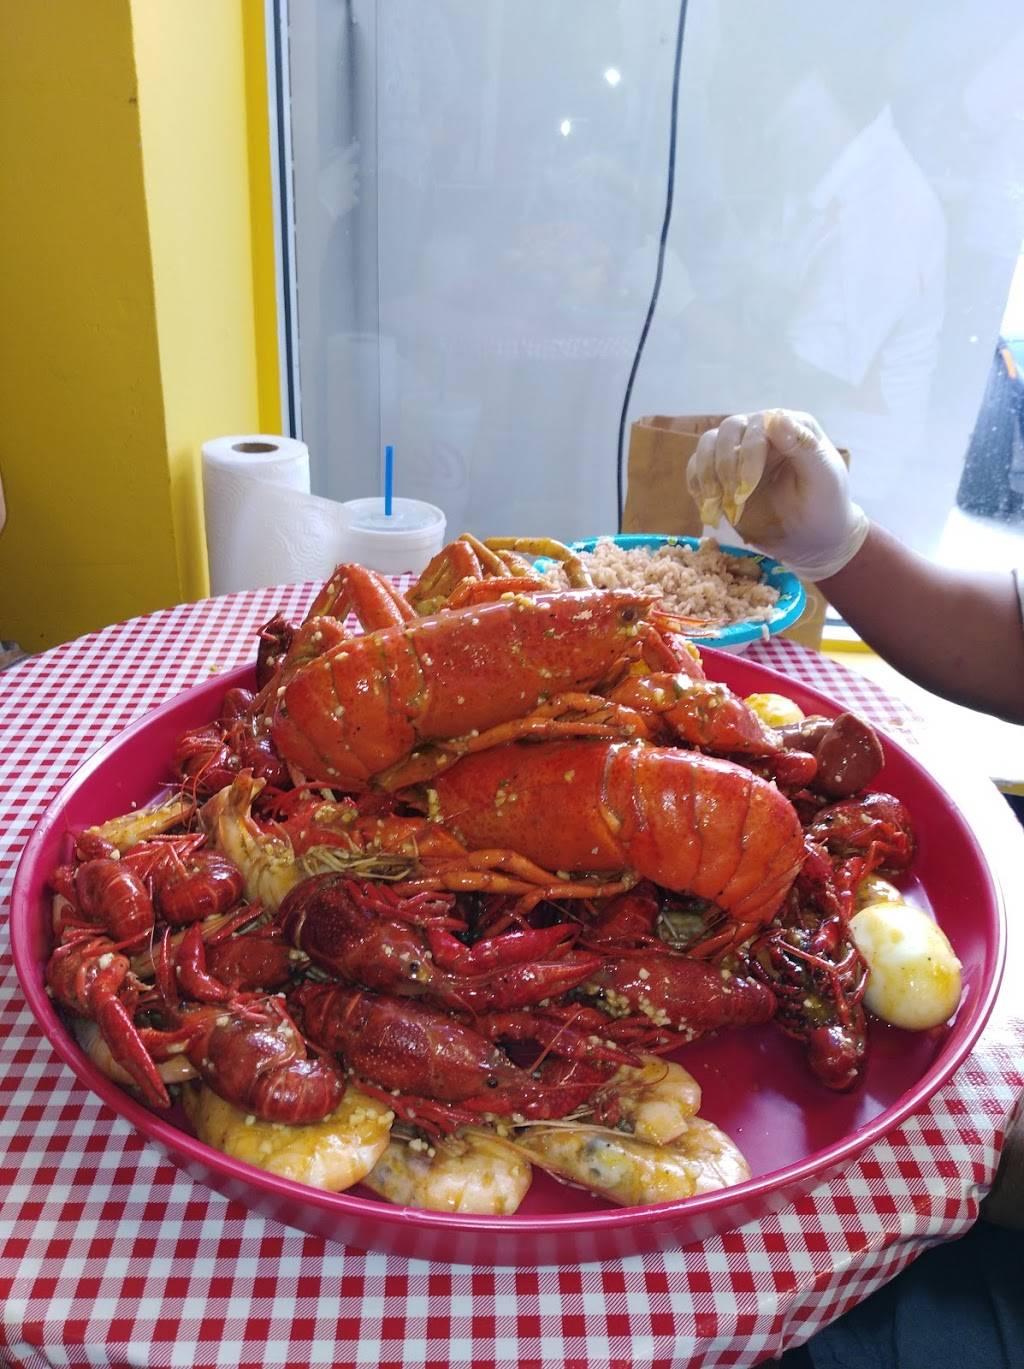 Crustaceans Boil House | restaurant | 1610, U.S. 83 Frontage Road South, I-10, Beaumont, TX 77703, USA | 4092231515 OR +1 409-223-1515